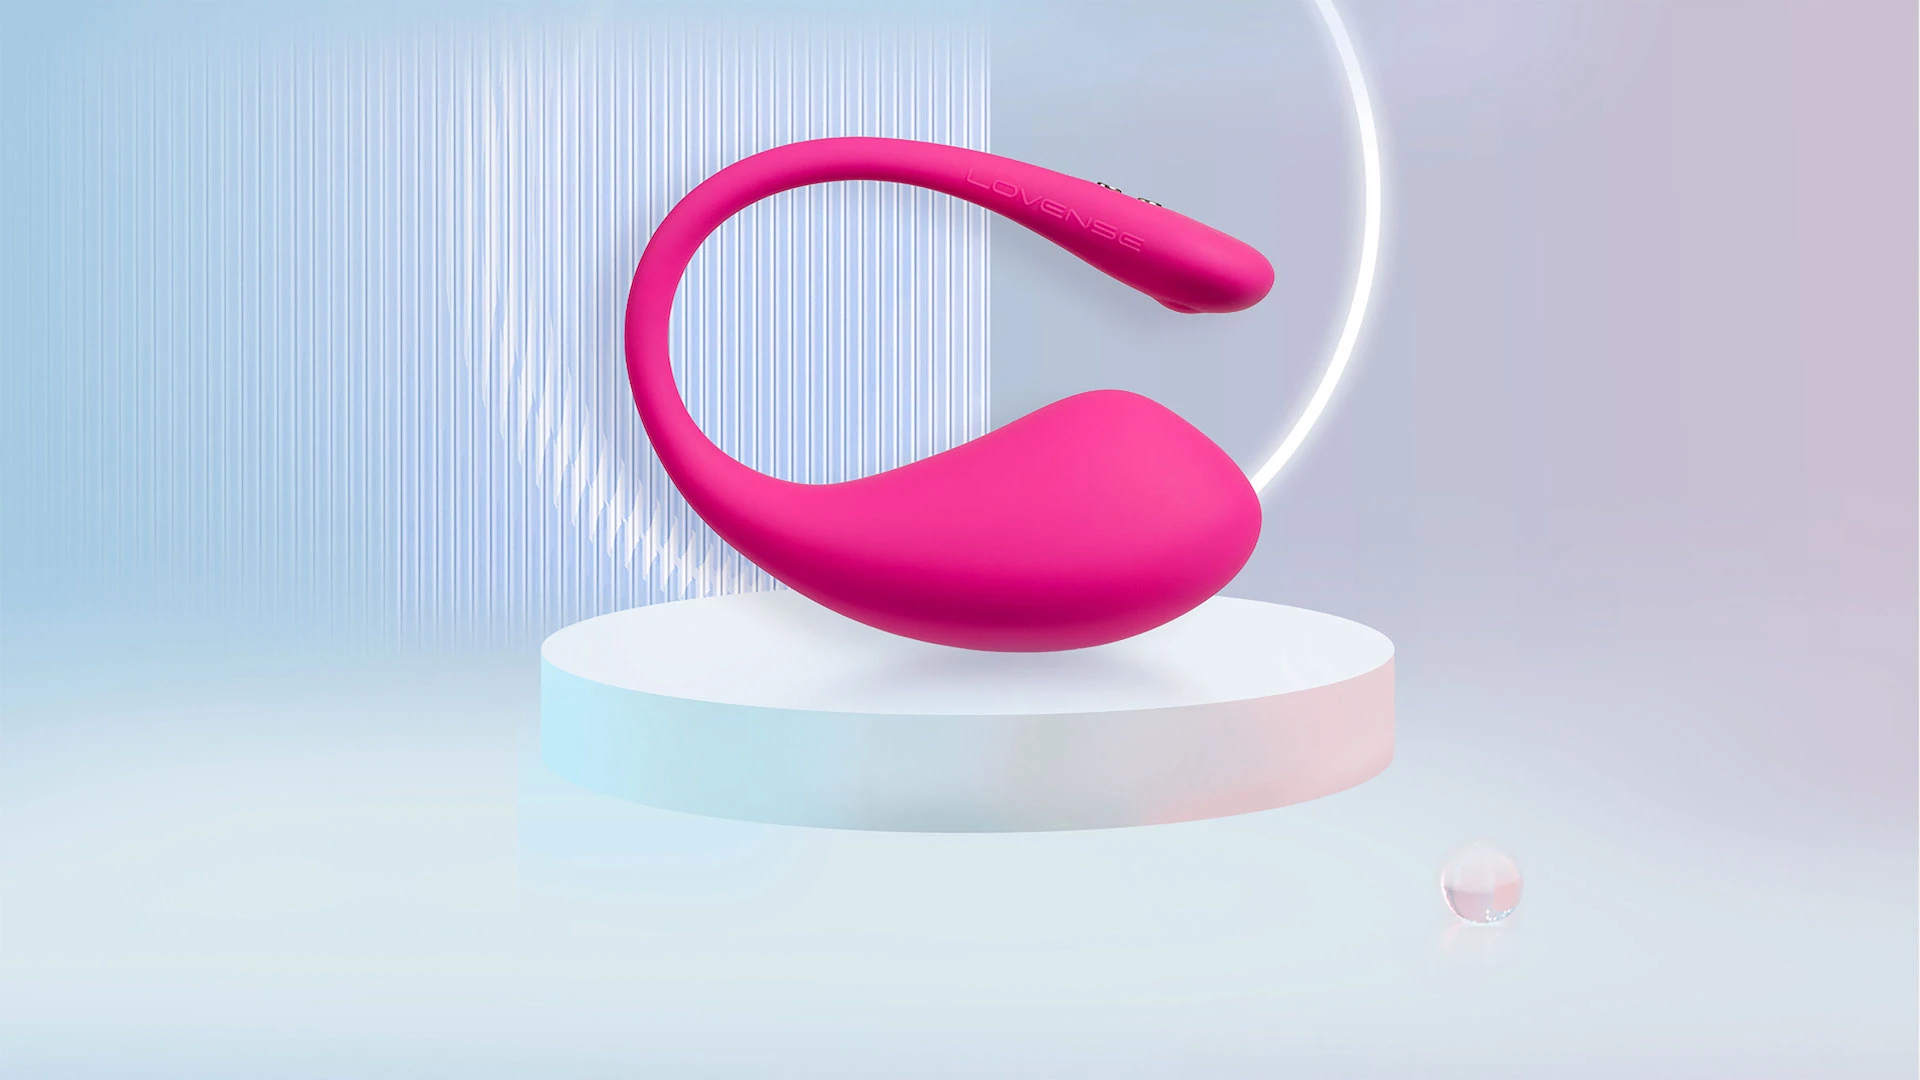 lovense lush 3 remote controlled sex toys